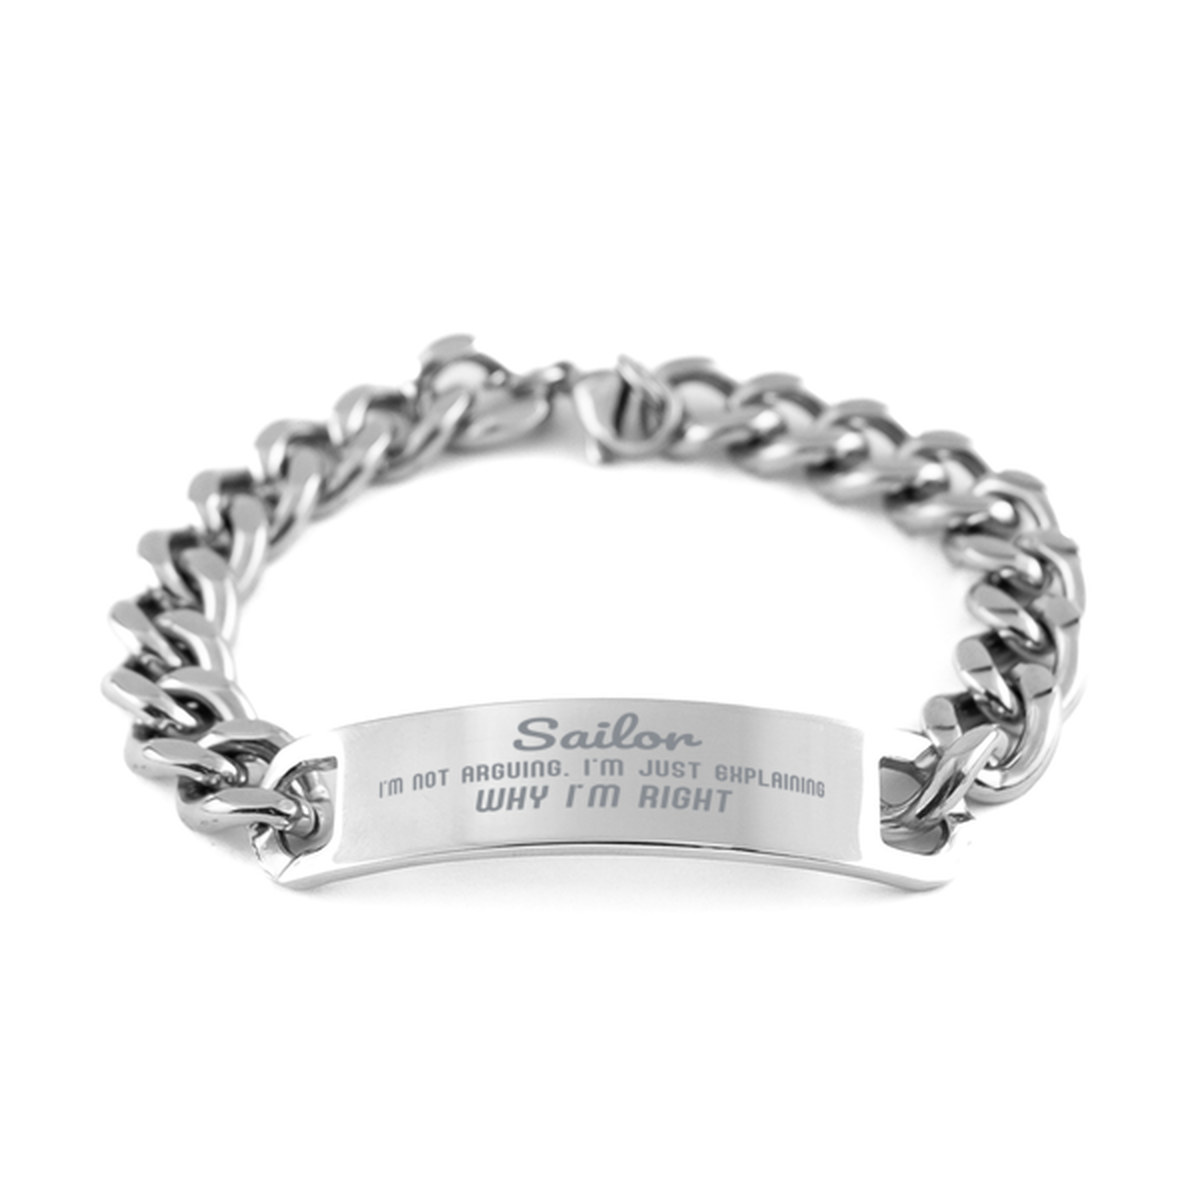 Sailor I'm not Arguing. I'm Just Explaining Why I'm RIGHT Cuban Chain Stainless Steel Bracelet, Graduation Birthday Christmas Sailor Gifts For Sailor Funny Saying Quote Present for Men Women Coworker